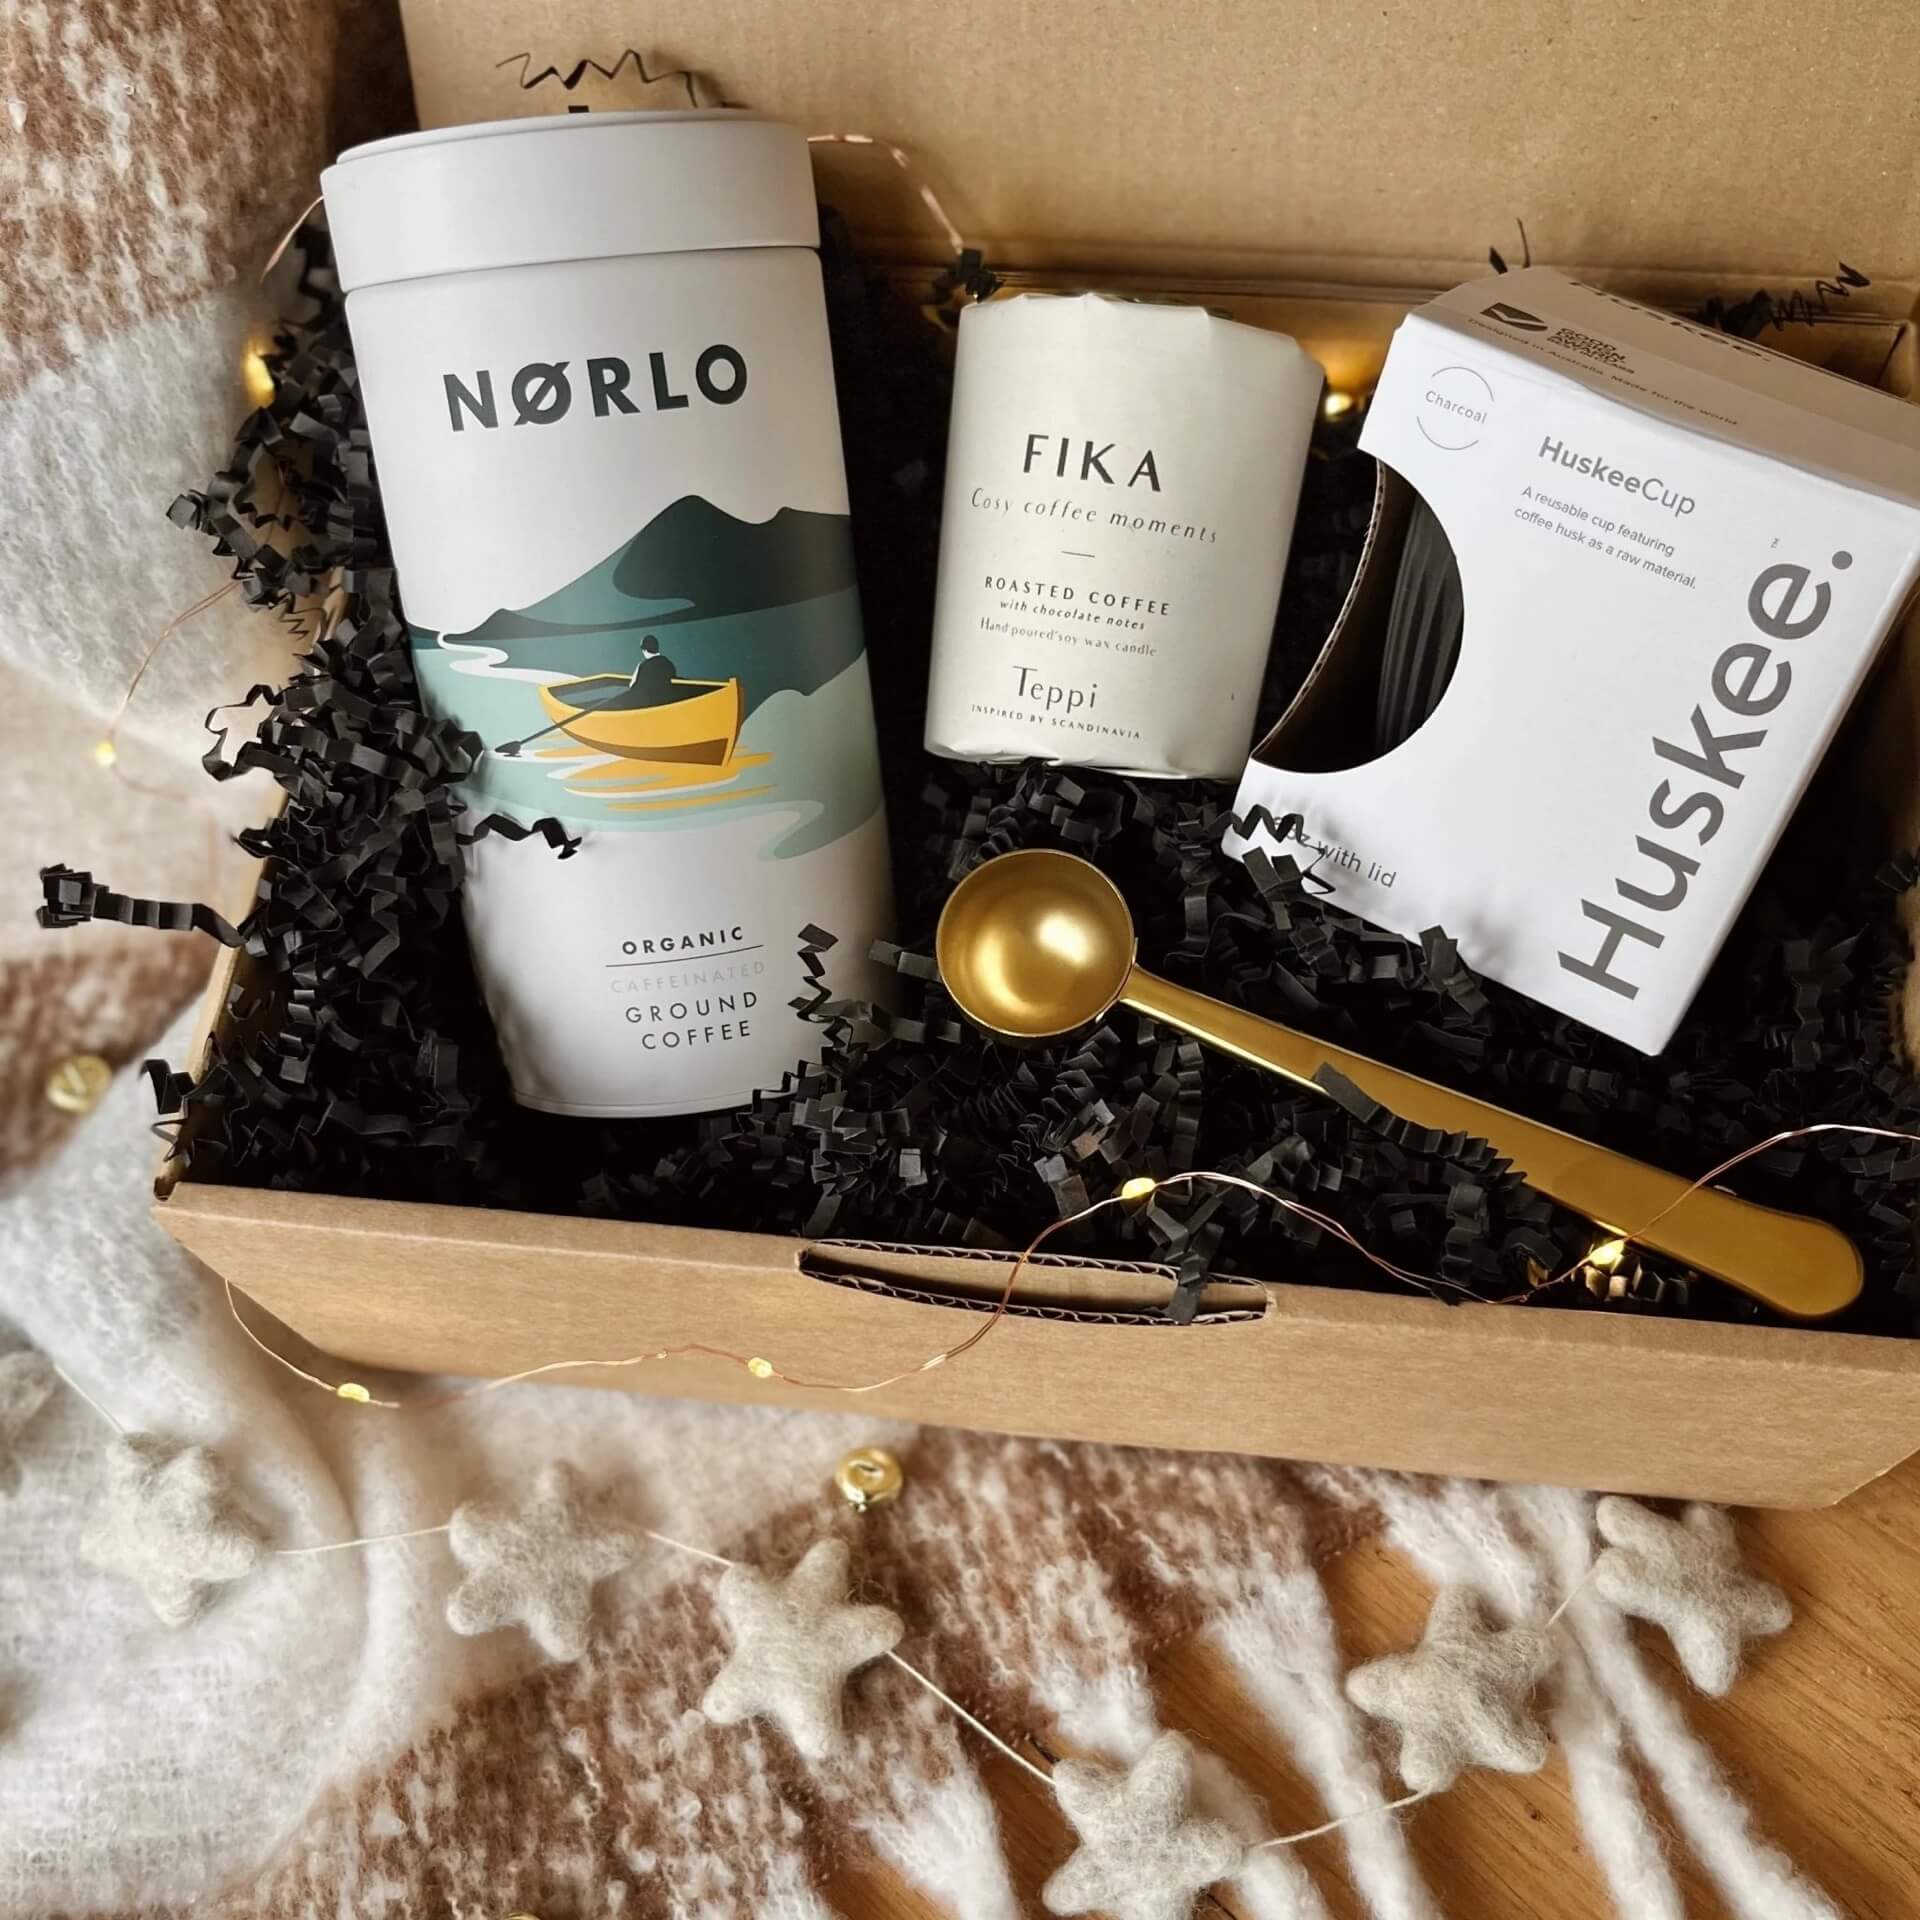 91 Magazine independent Christmas Gift Guide - Fika gift set from Teppi